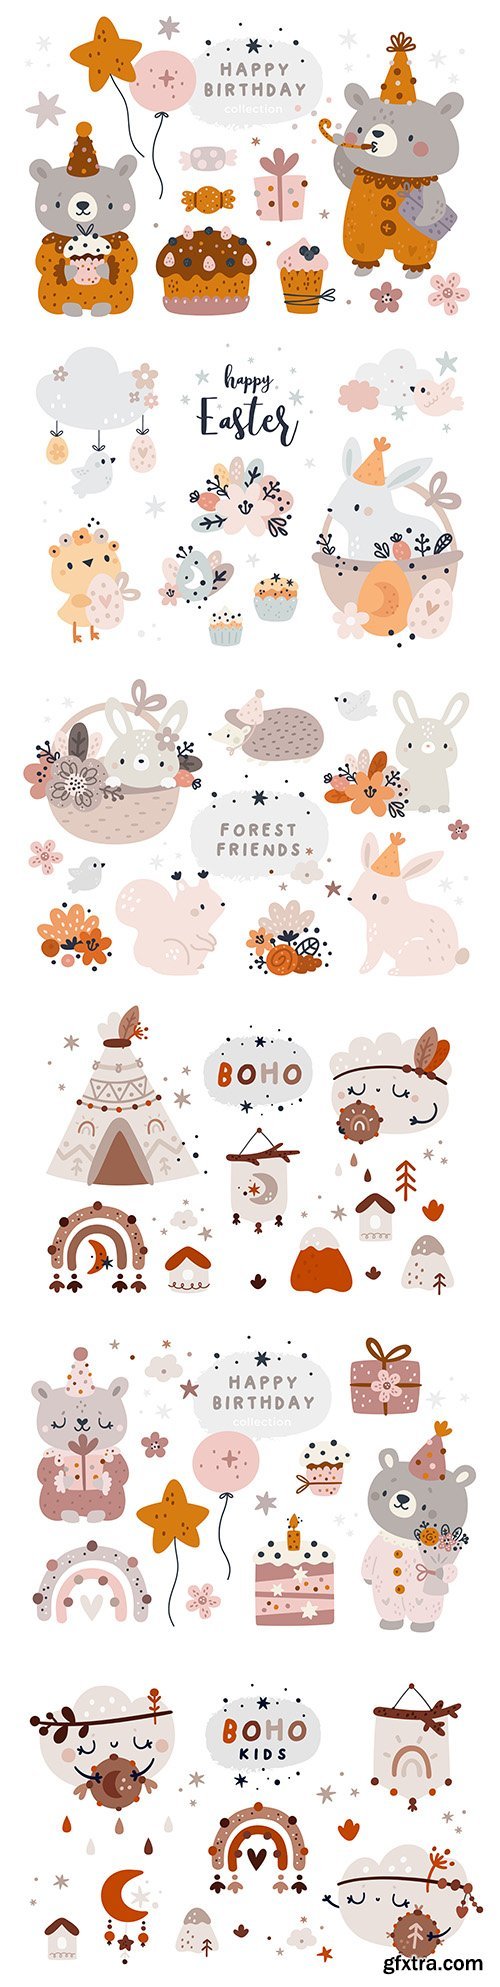 Cute animal design elements in Scandinavian and boho style